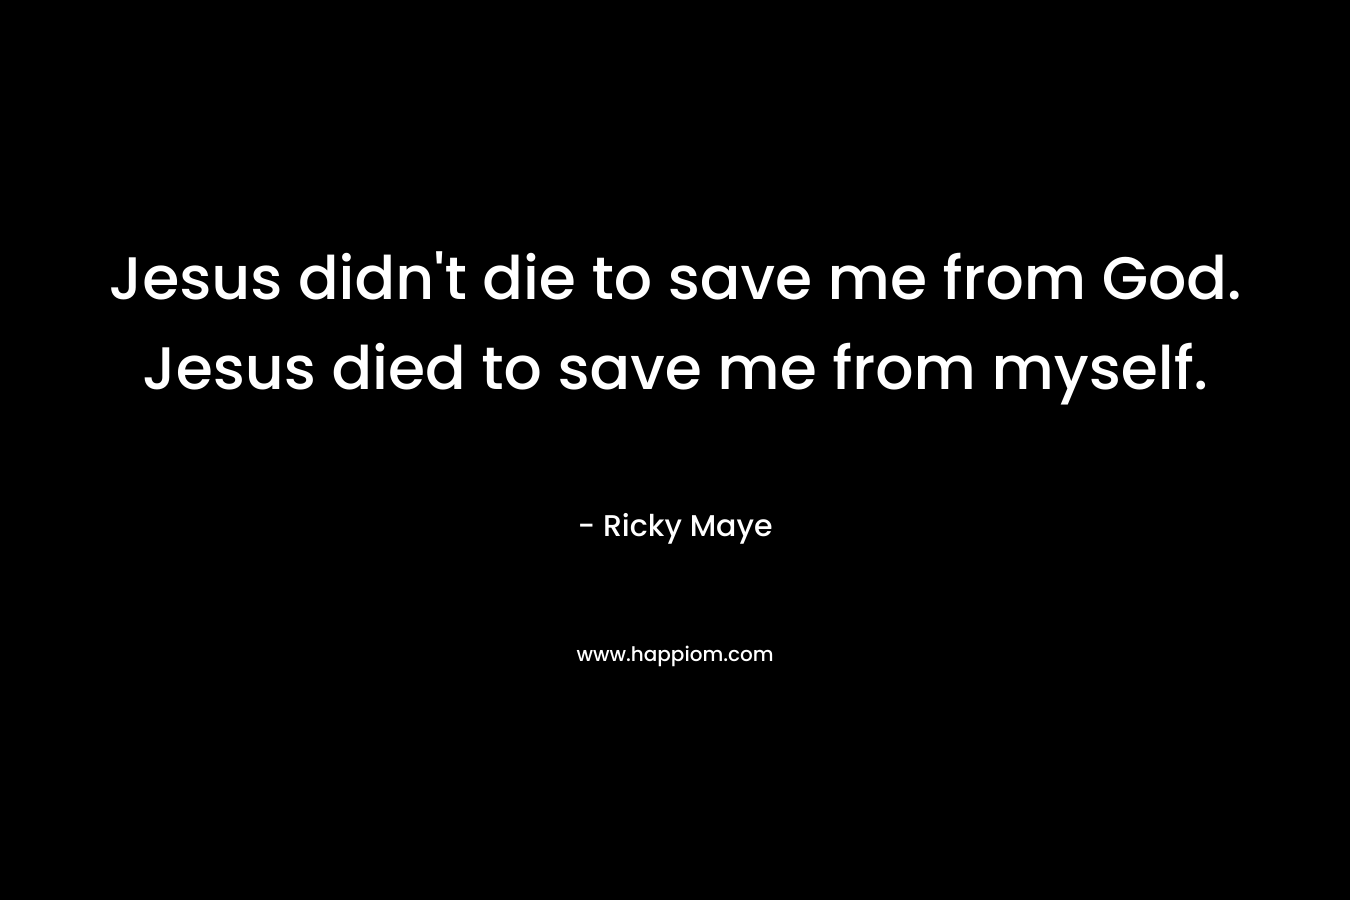 Jesus didn’t die to save me from God. Jesus died to save me from myself. – Ricky Maye